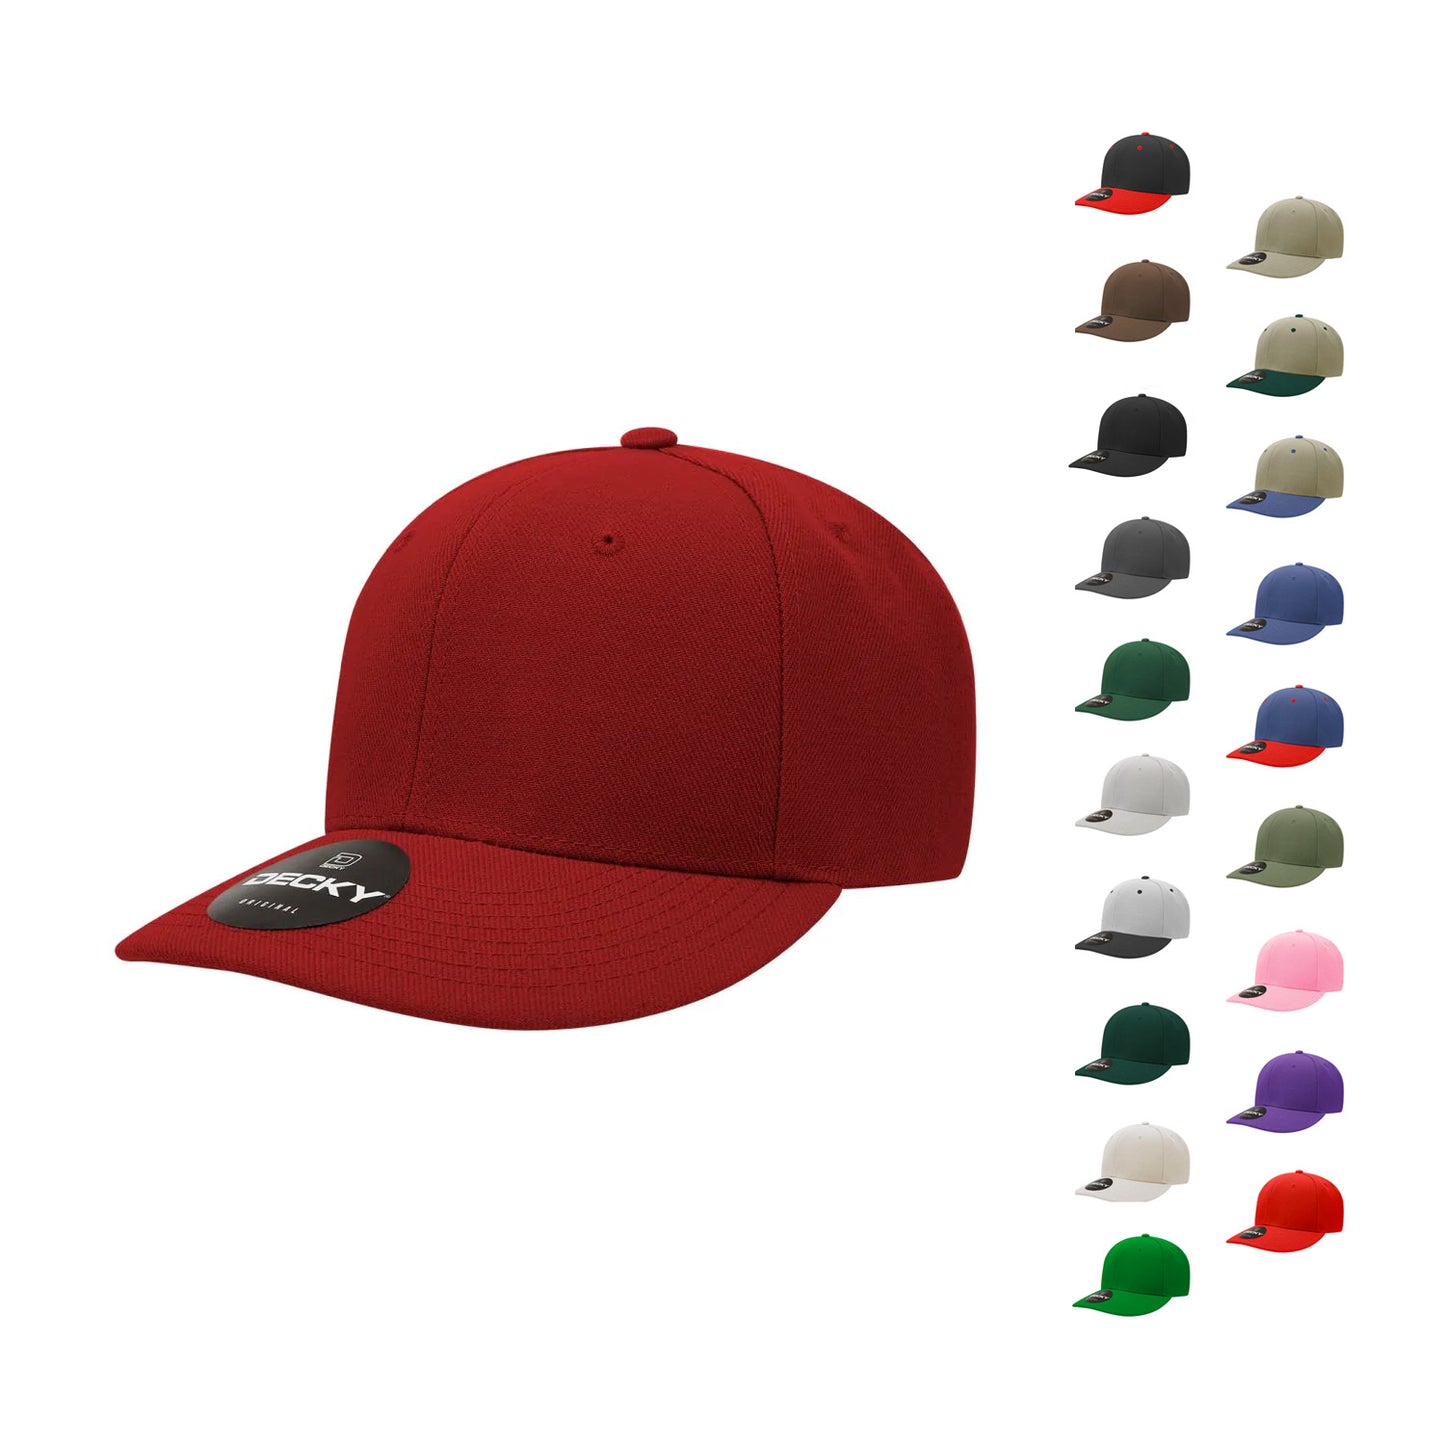 Decky Deluxe 207 Mid Profile Hats 6 Panel Curve Bill Polo Dad Baseball Caps